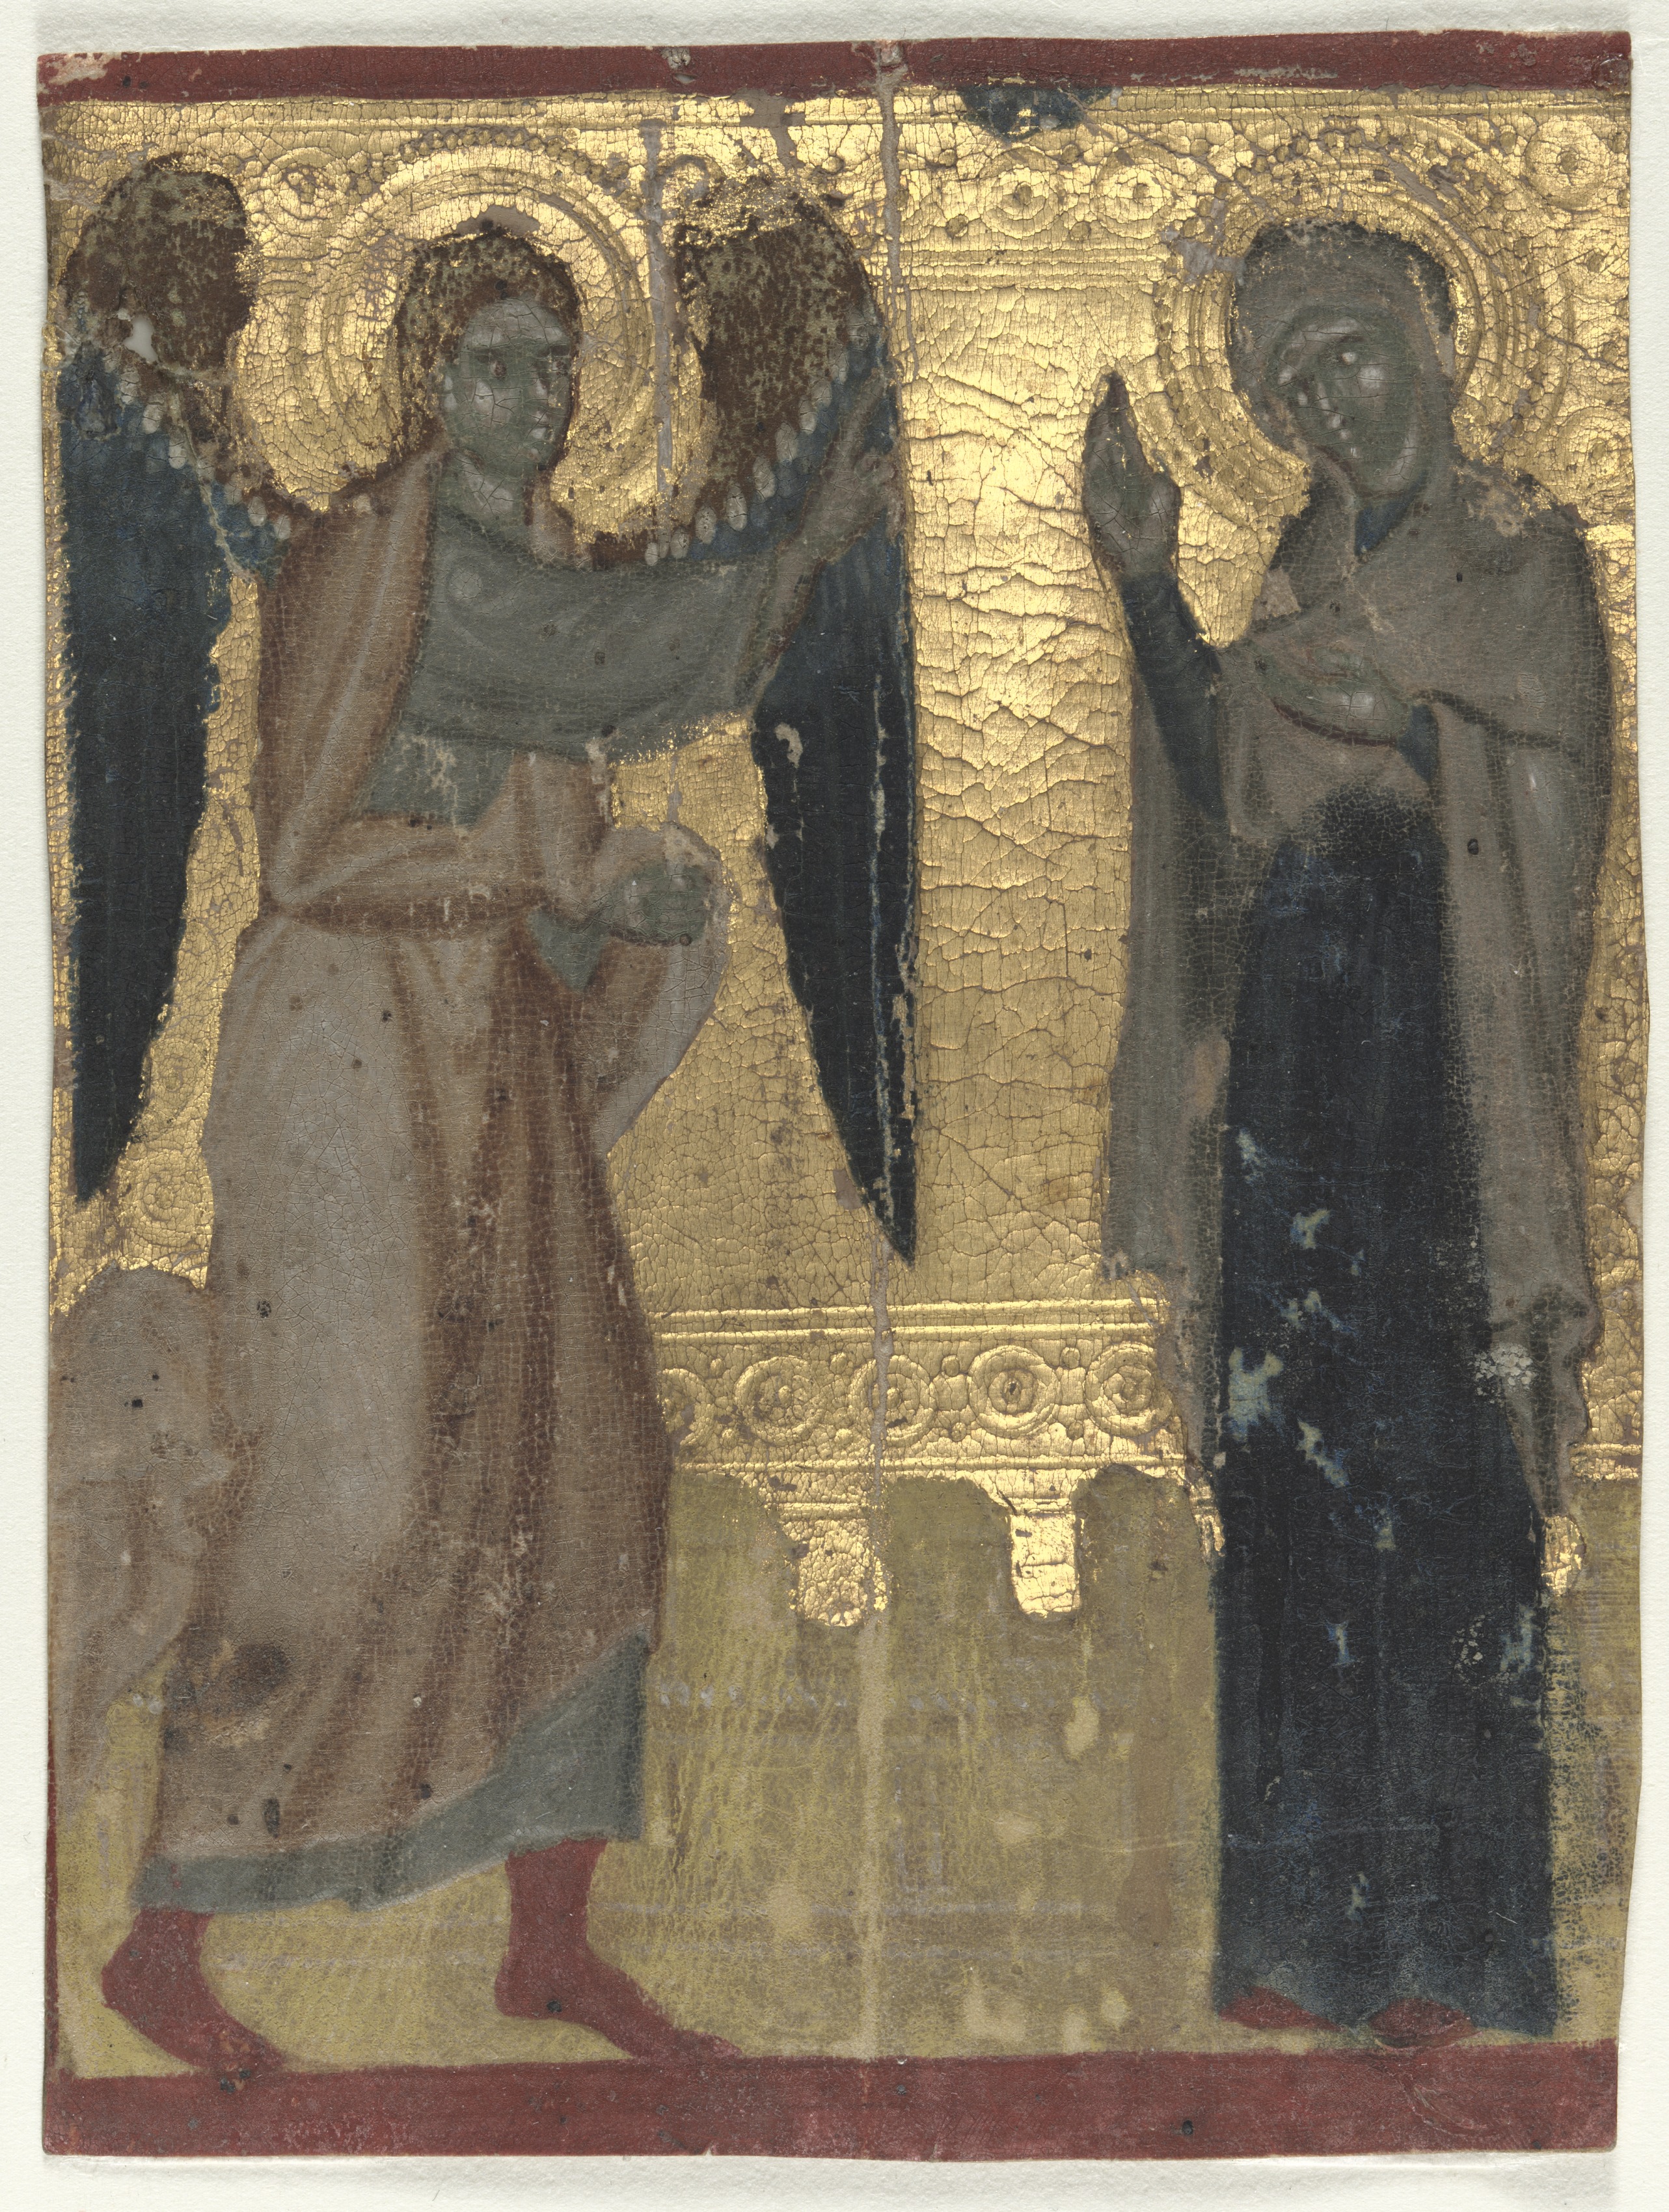 Miniature Excised from a Book of Hours: The Annunciation